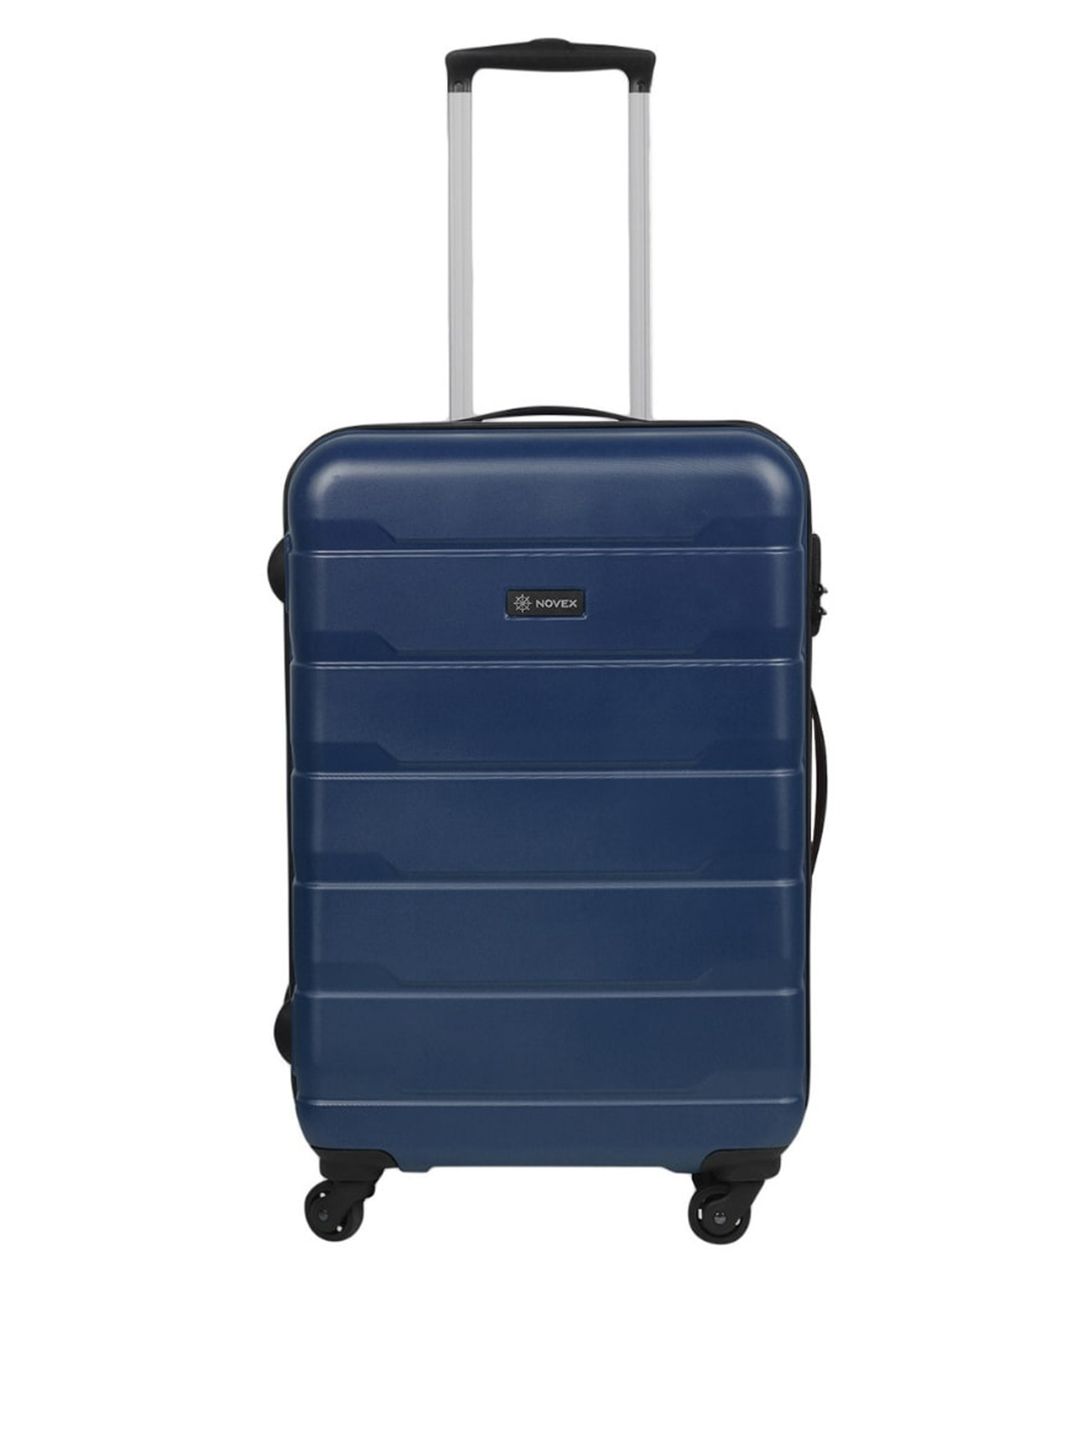 NOVEX Blue Solid Hard-Sided Large Trolley Suitcase Price in India